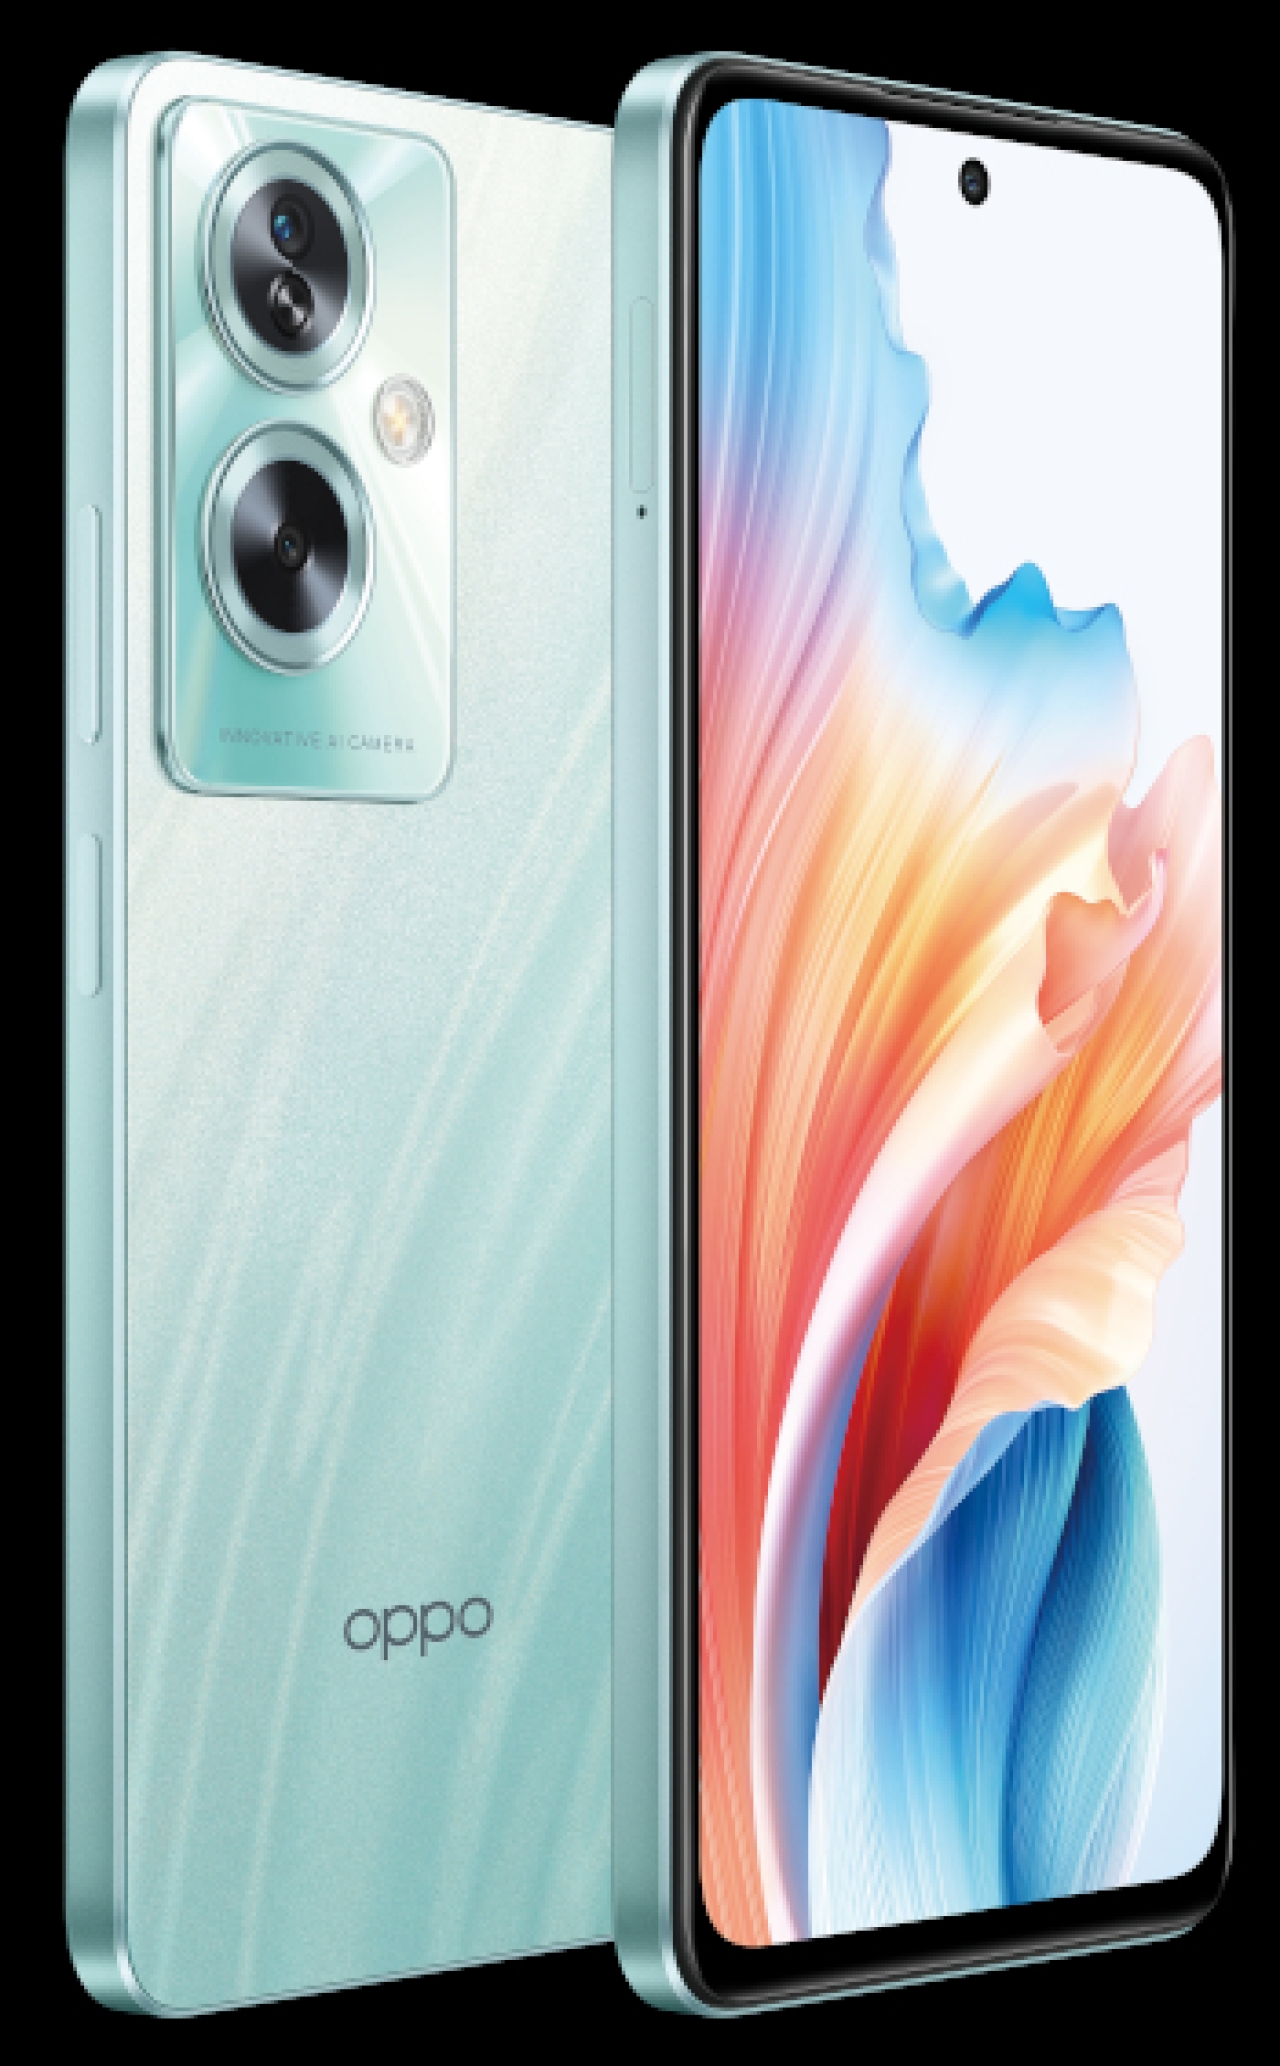 OPPO India has launched its latest A79 5G smartphone